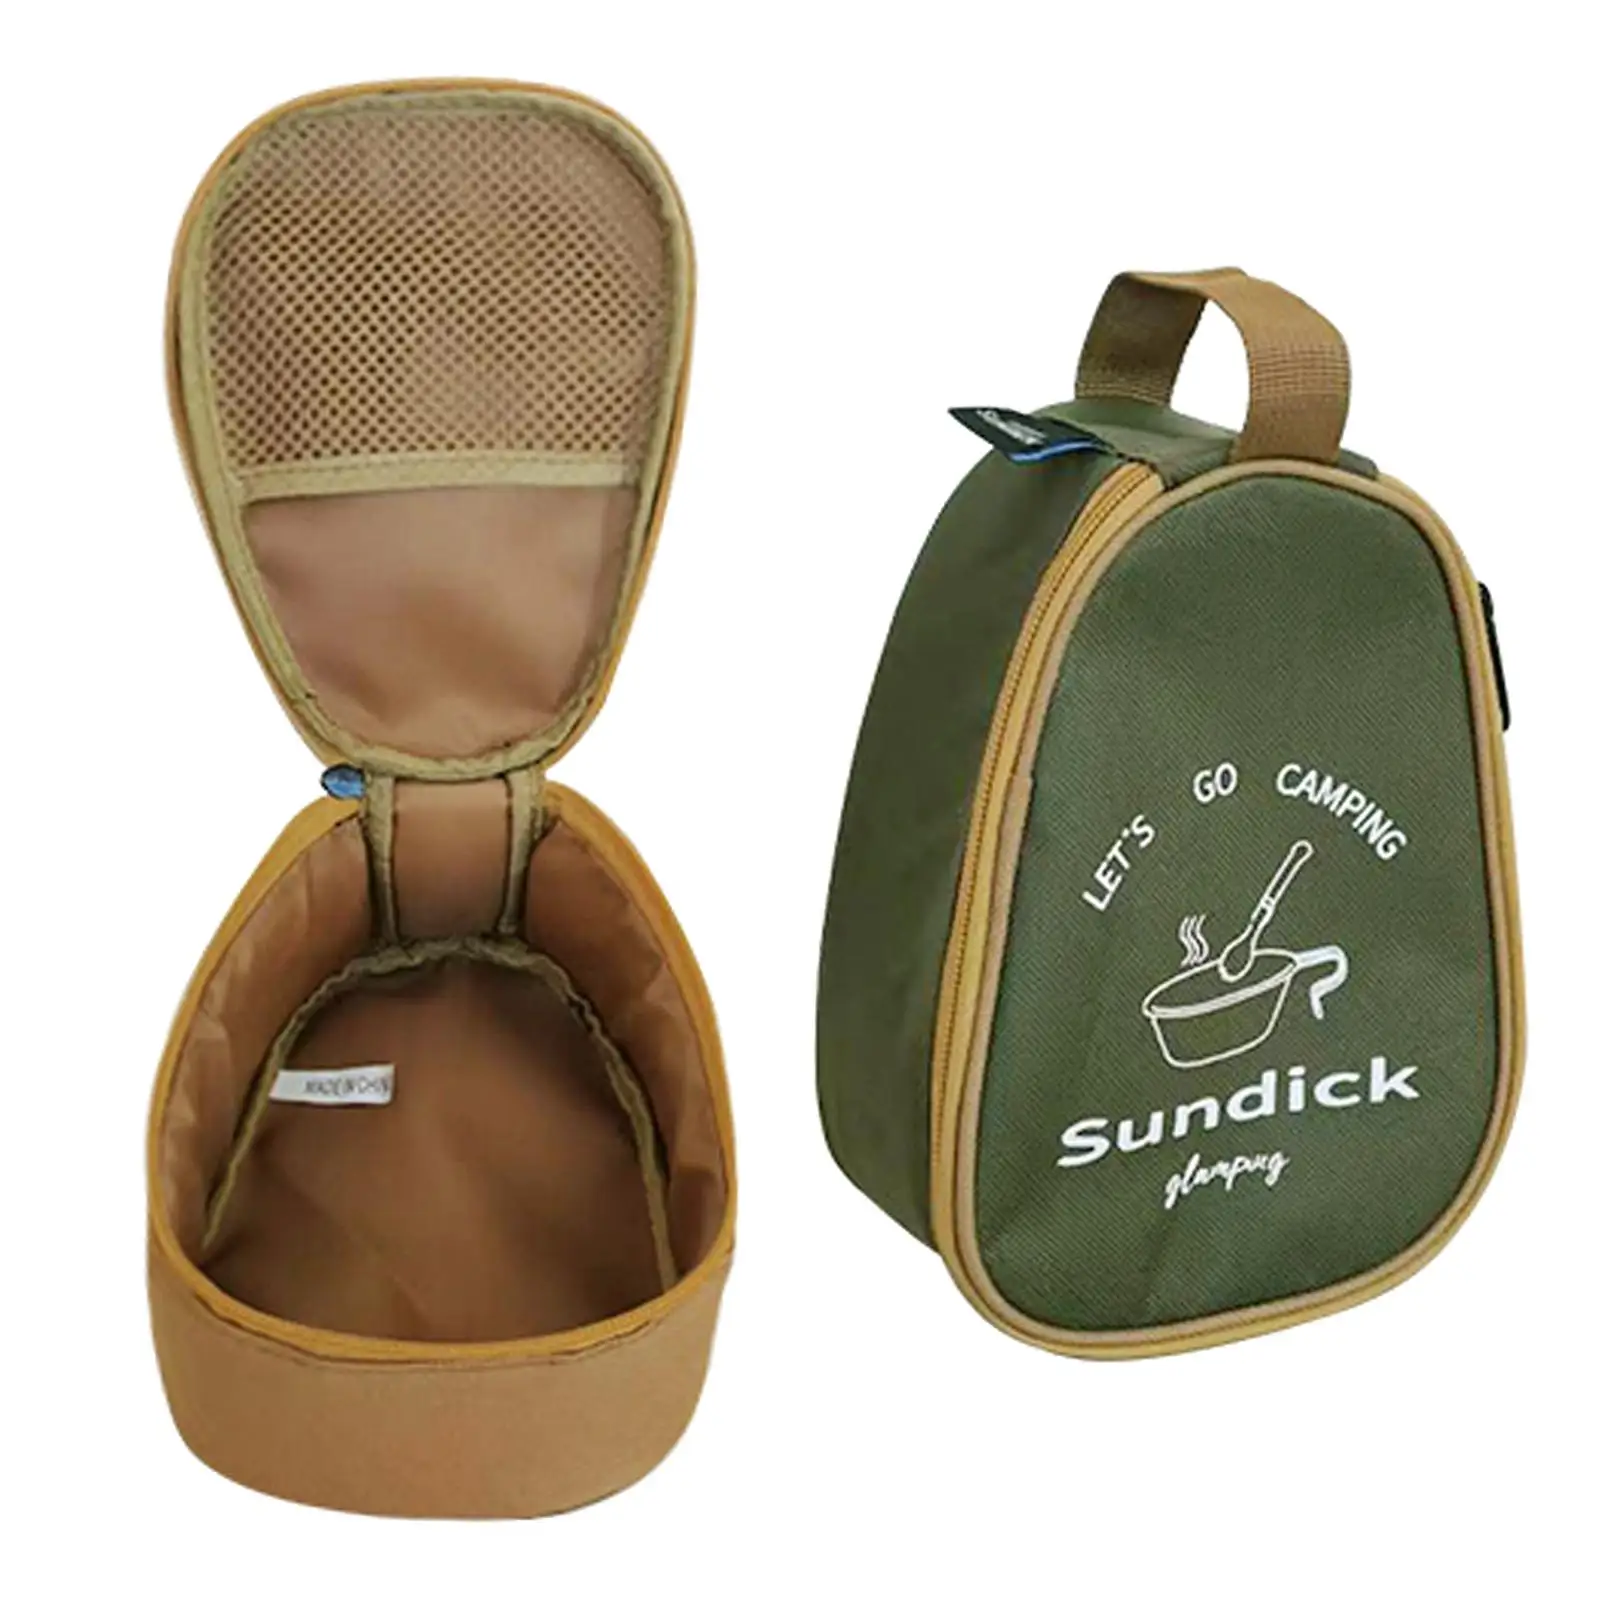 Portable Outdoor Bowls, Cups, Storage Bag, Camp, Travel, Hiking, Accessories, Cookware Container